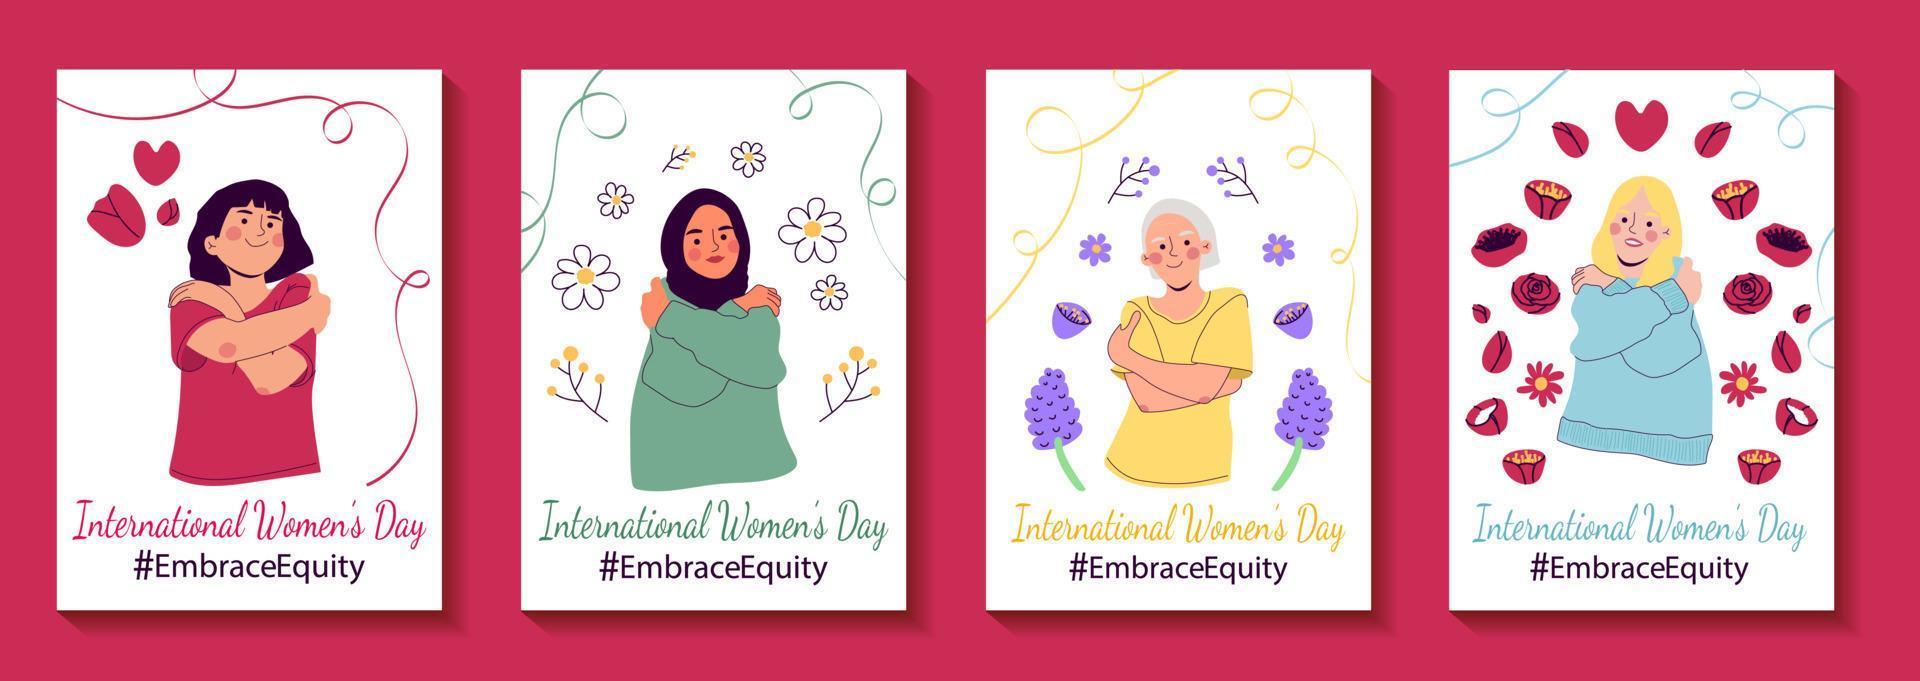 Embrace equity International women's day cards vector illustration